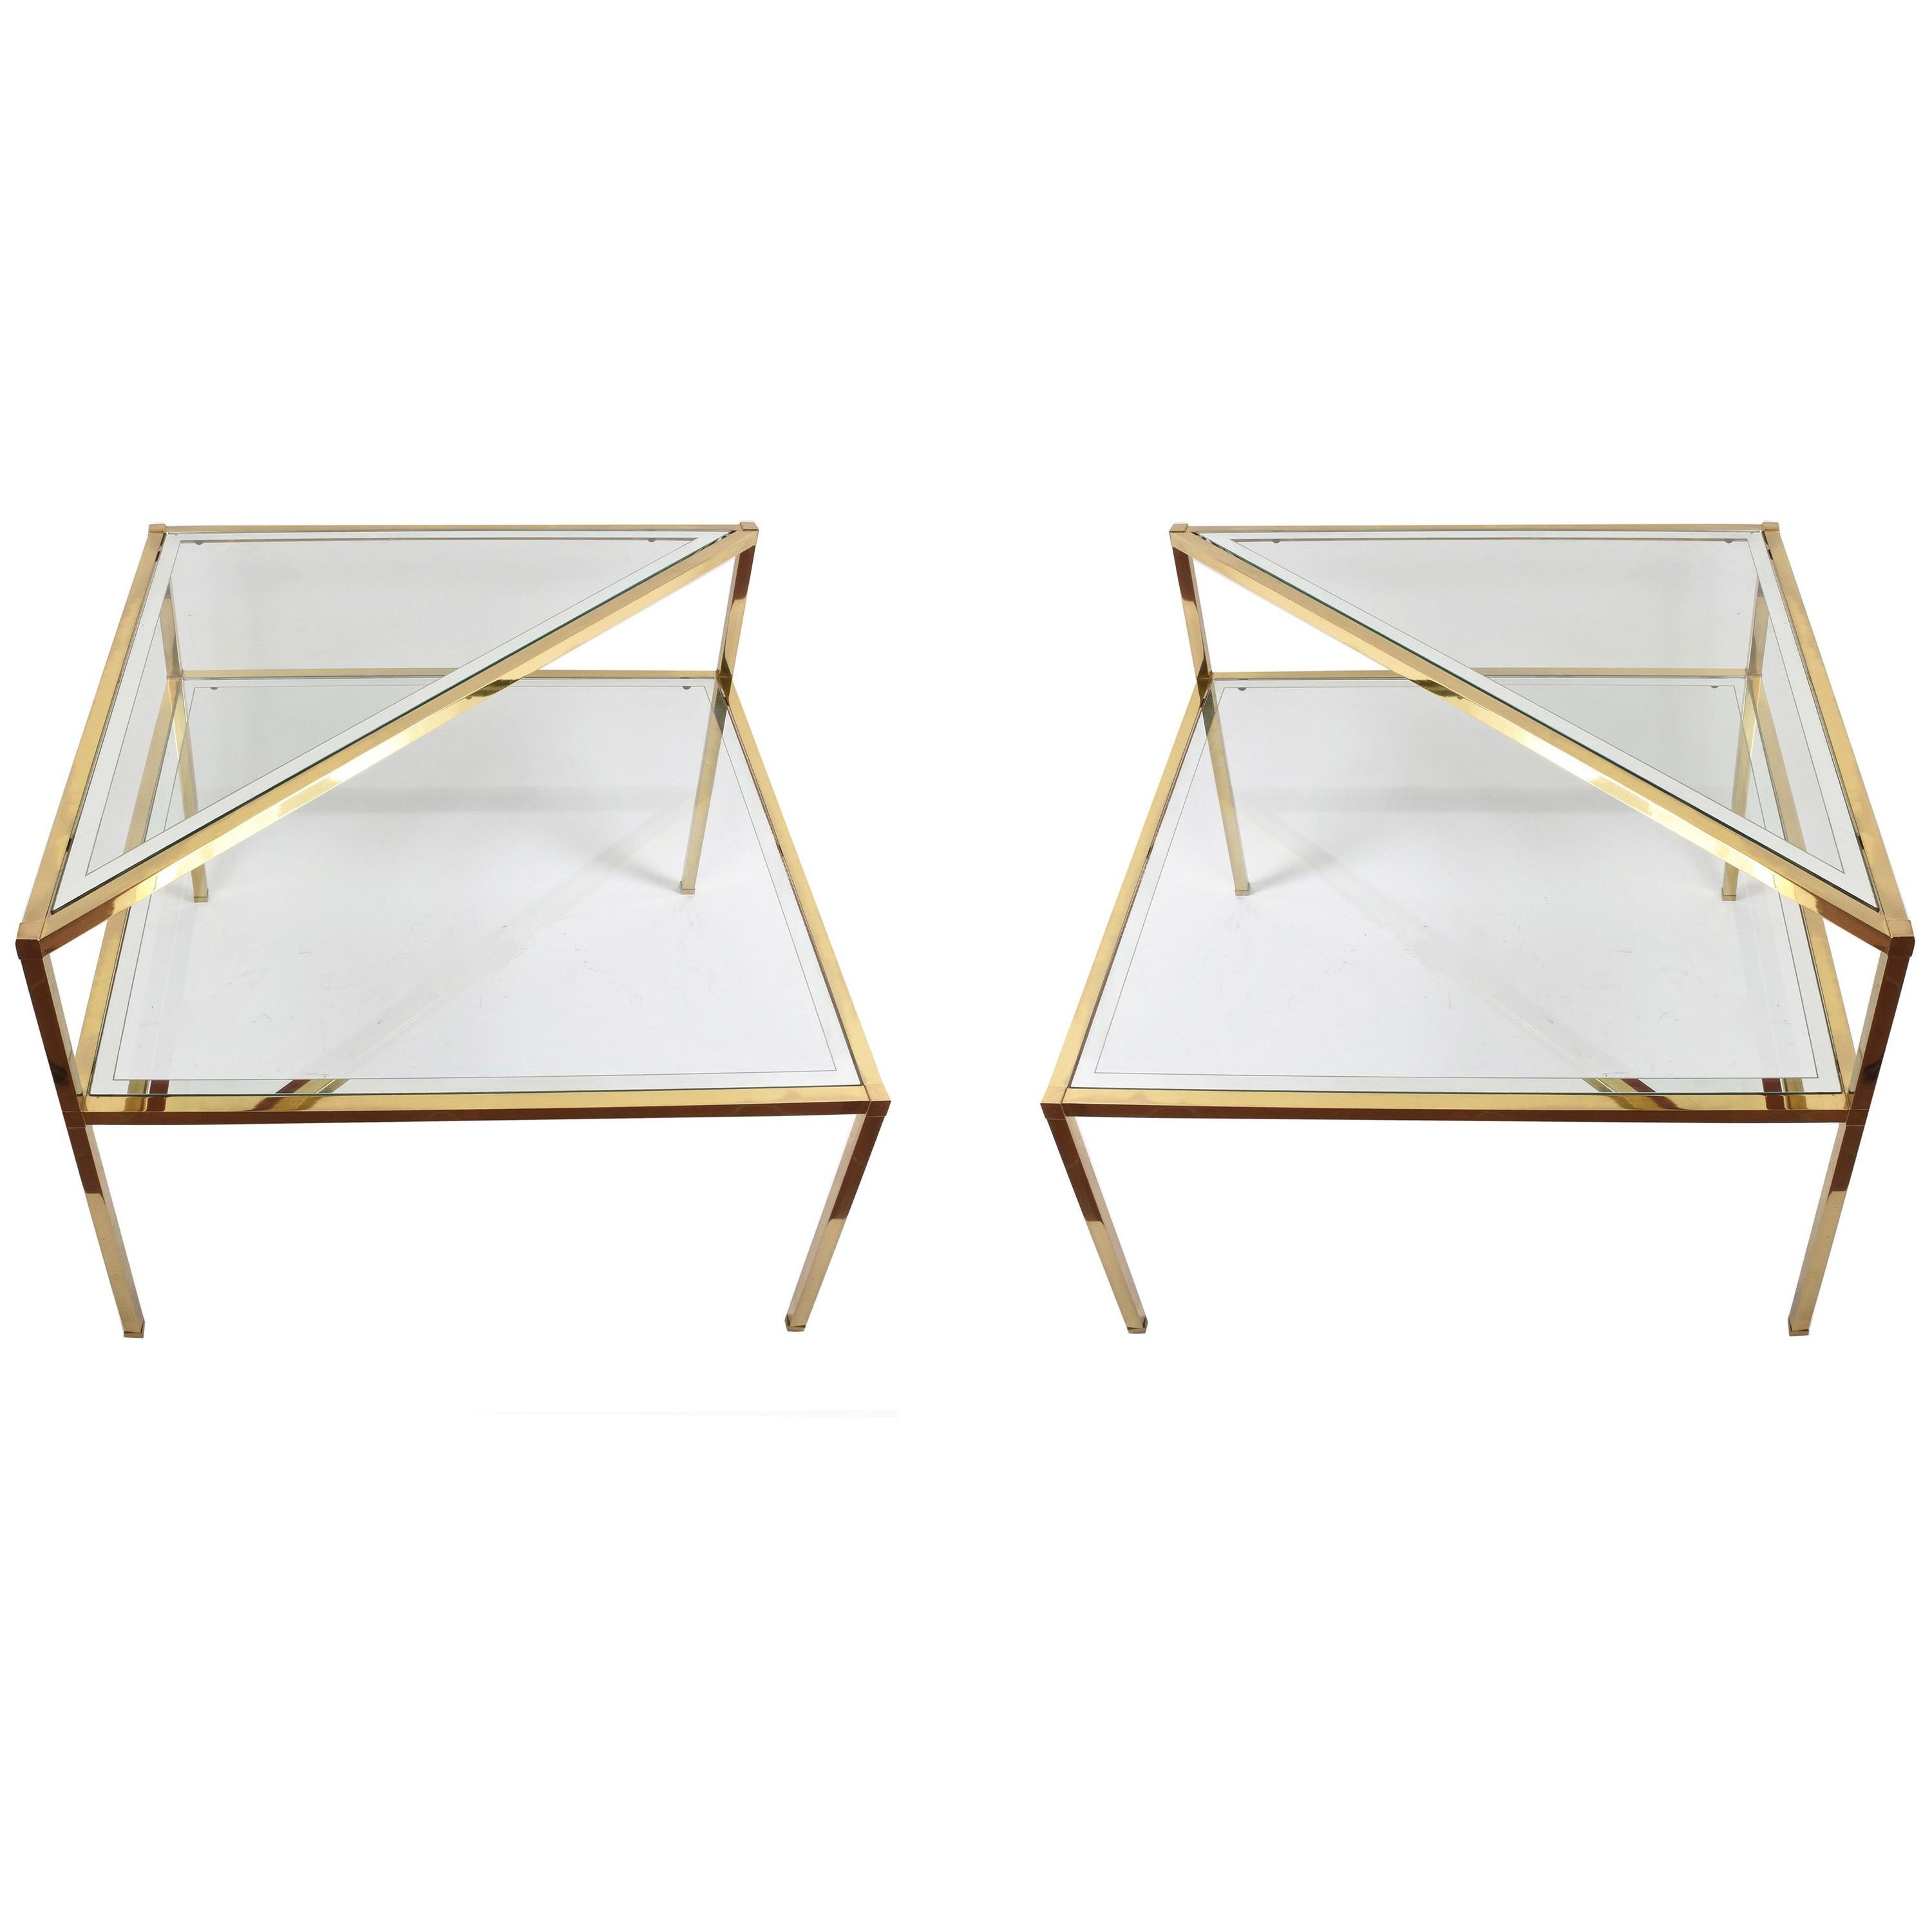 Glass and Brass Double Shelf Italian Coffee Tables with Mirrored Edge, 1970s